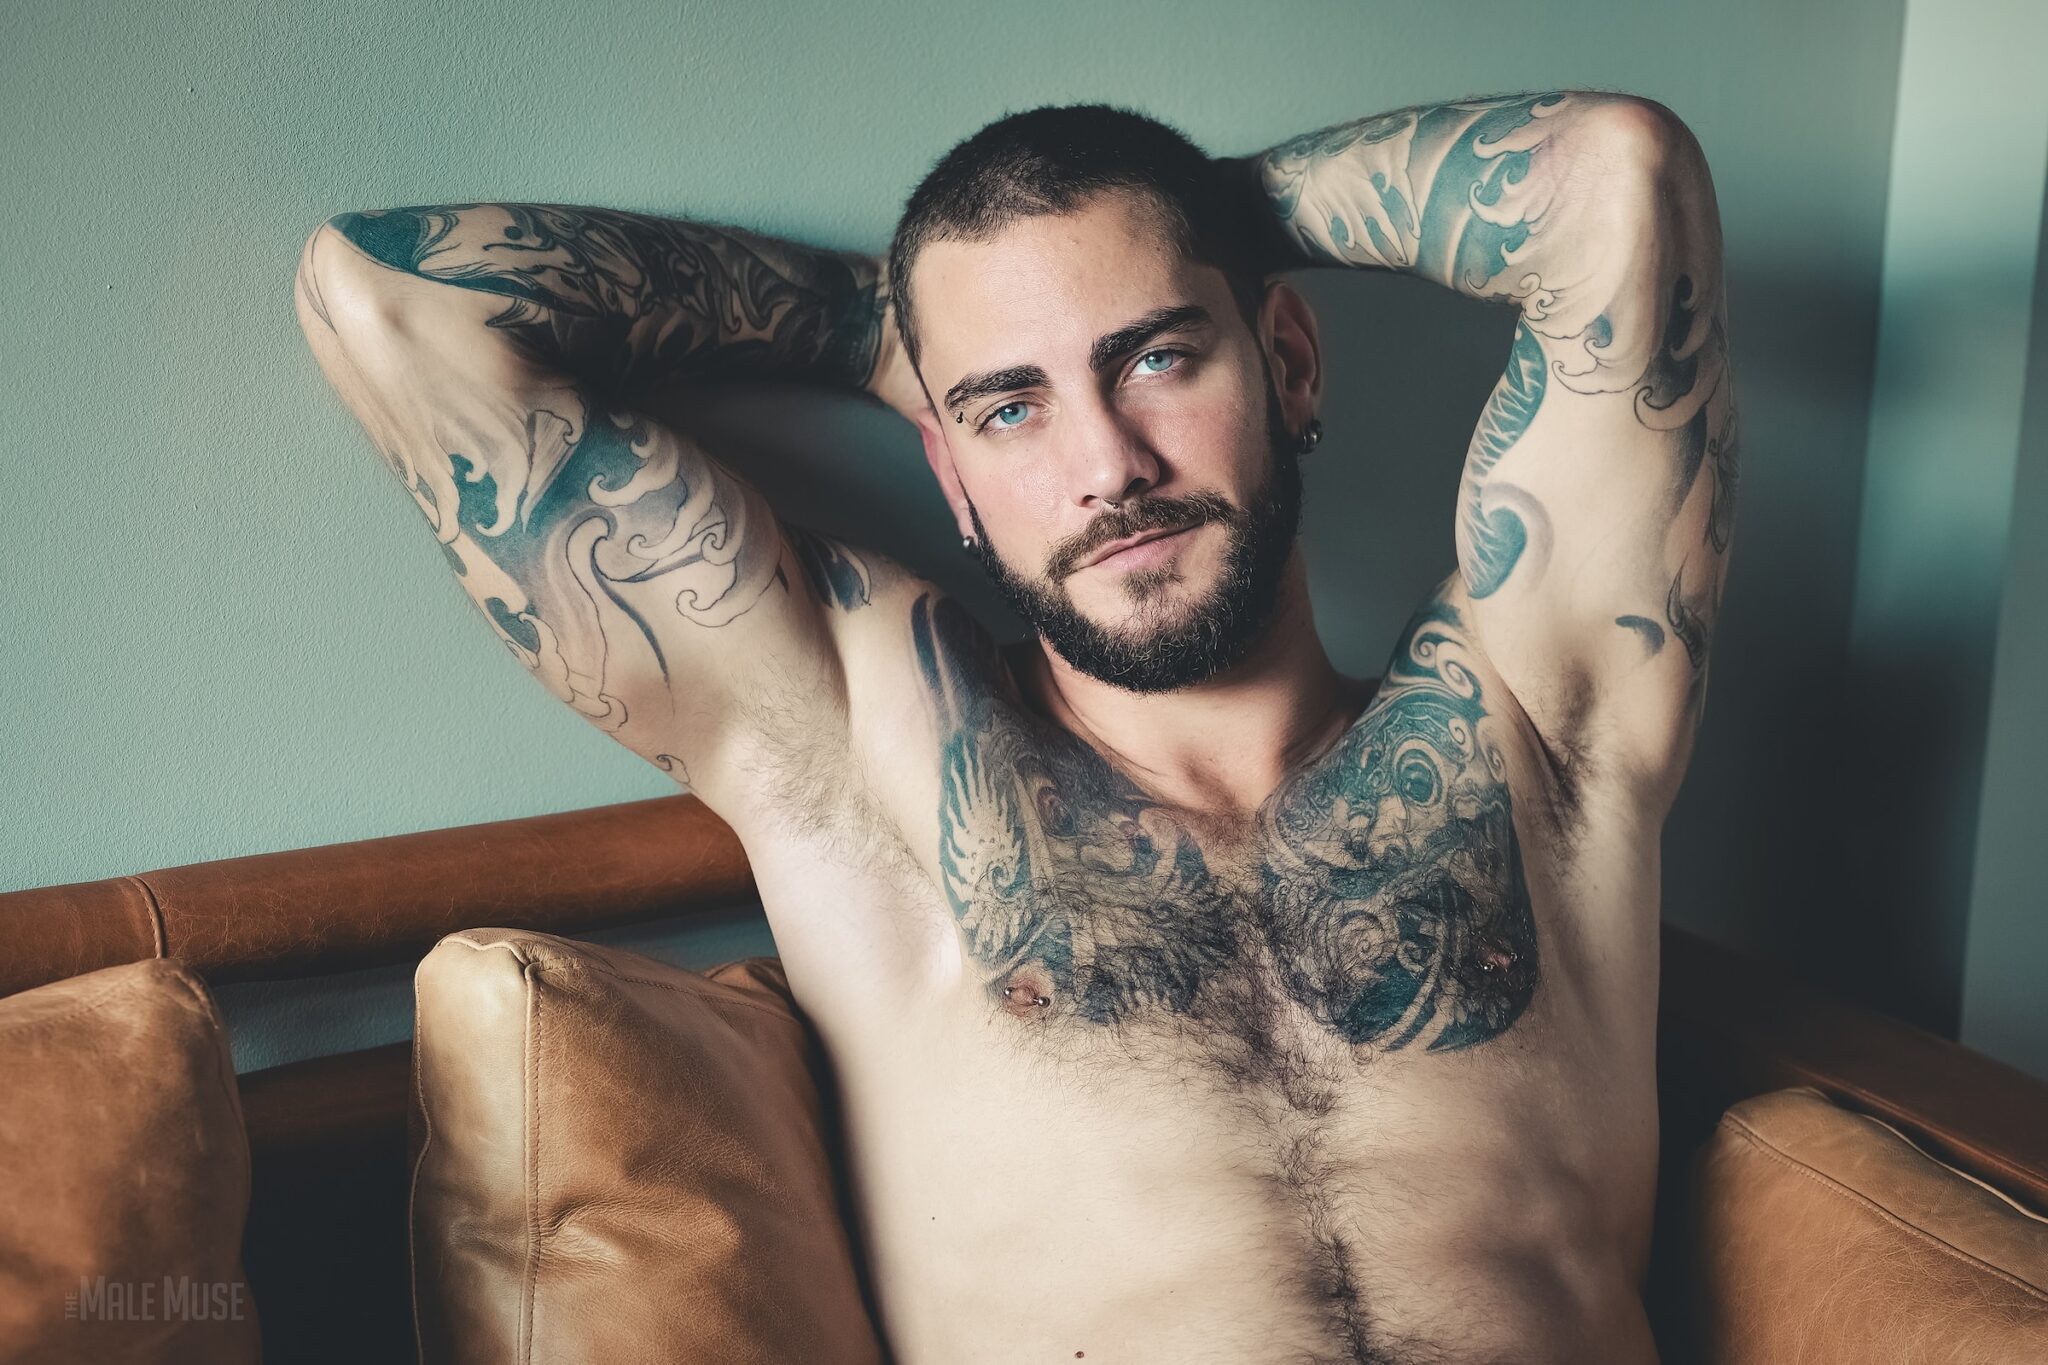 Hairy Muscle Hunk With Piercing blue eyes Marc From The Male Muse striking